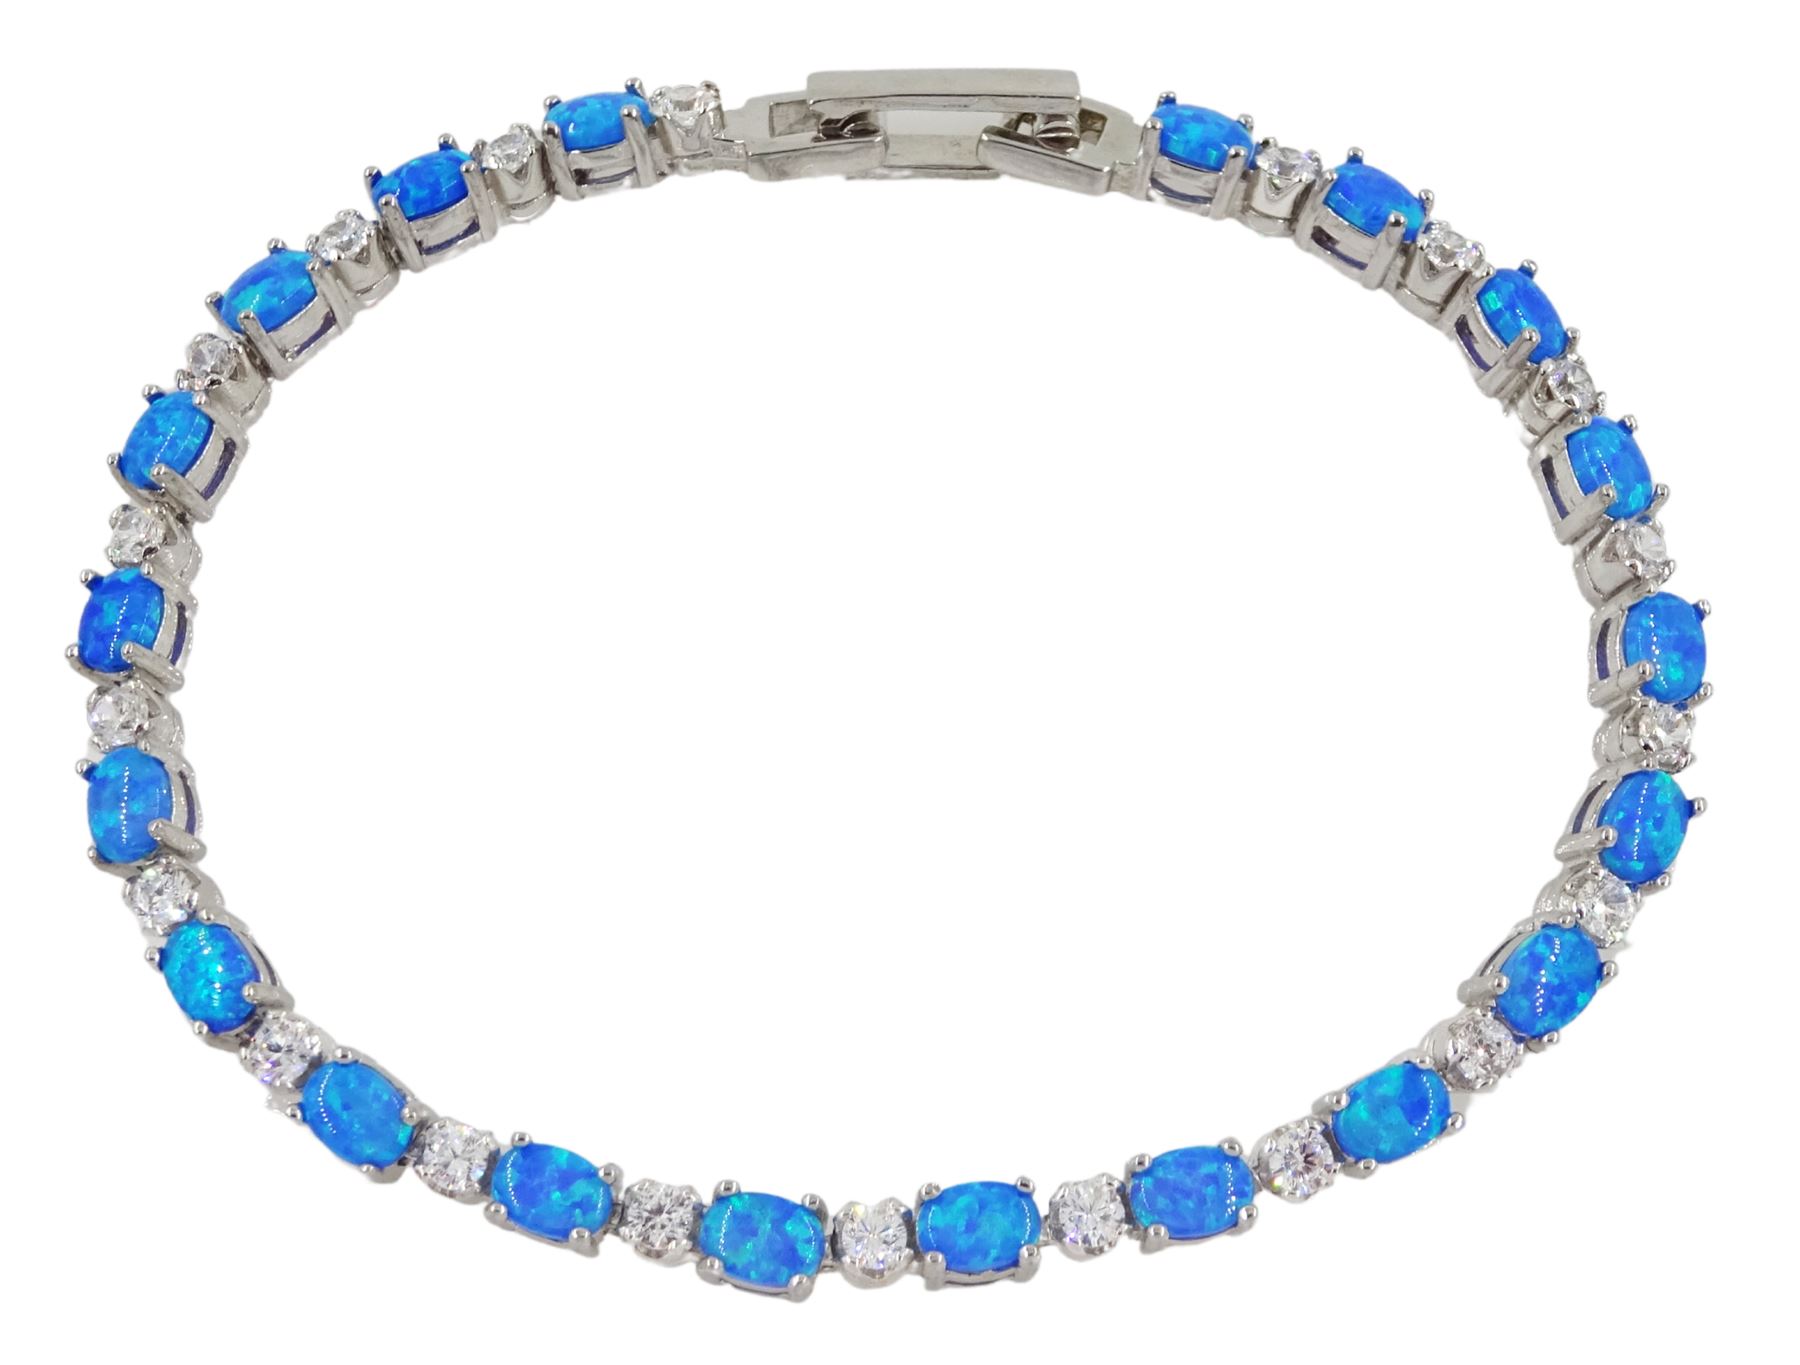 Silver opal and cubic zirconia bracelet